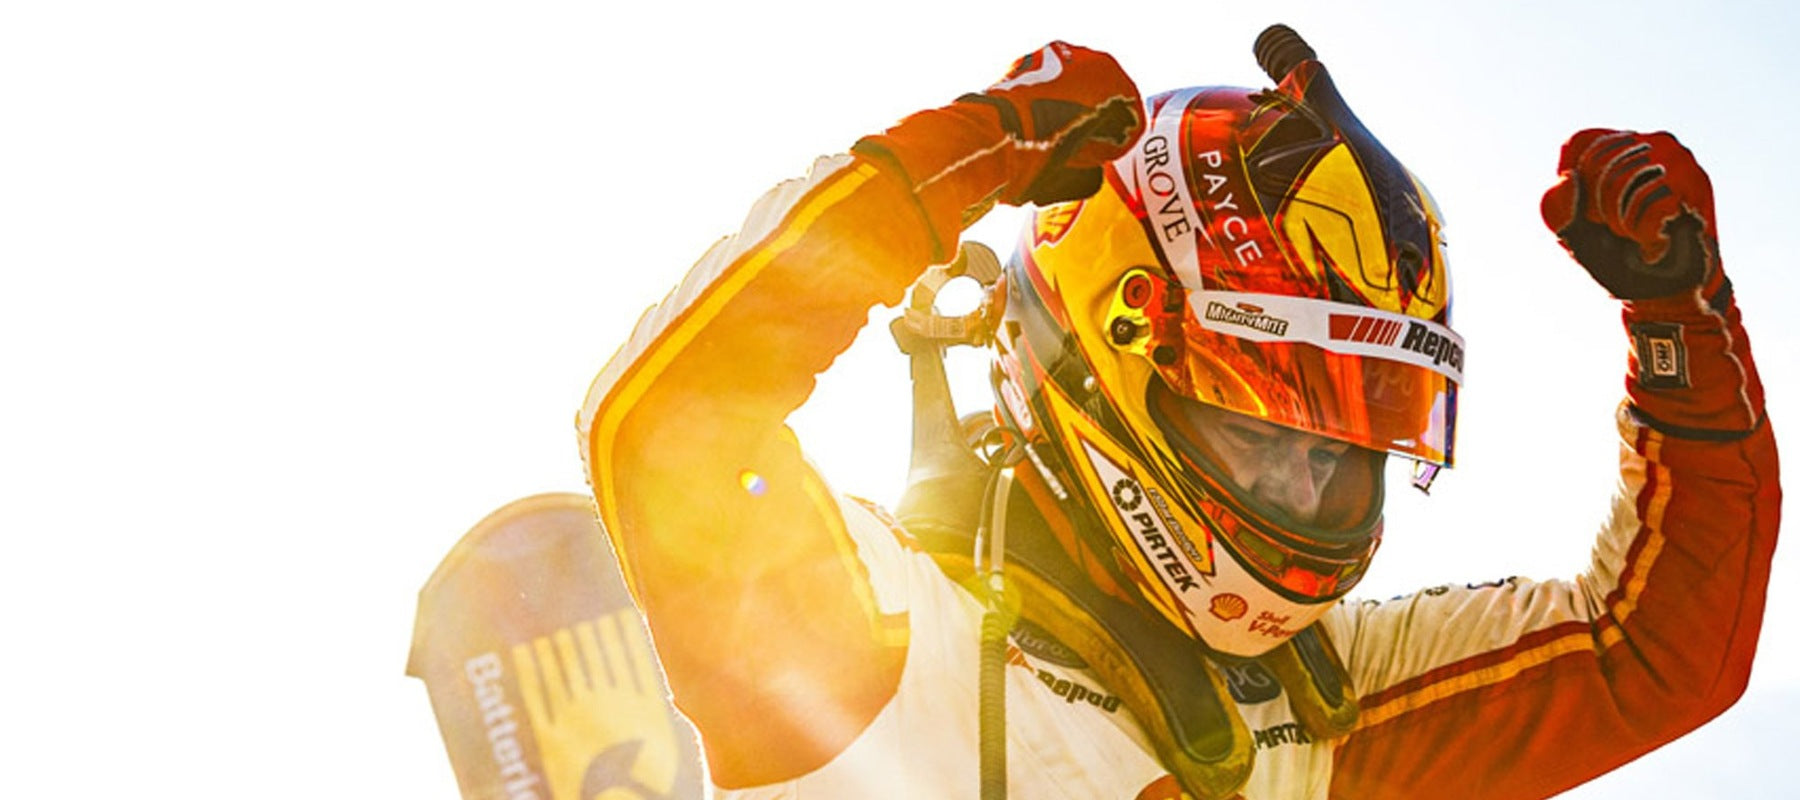 OMP Racing Products: Fire Suit, Race Gloves, Shoes, Seats, Harnesses, Steering Weels and More - Fast Racer